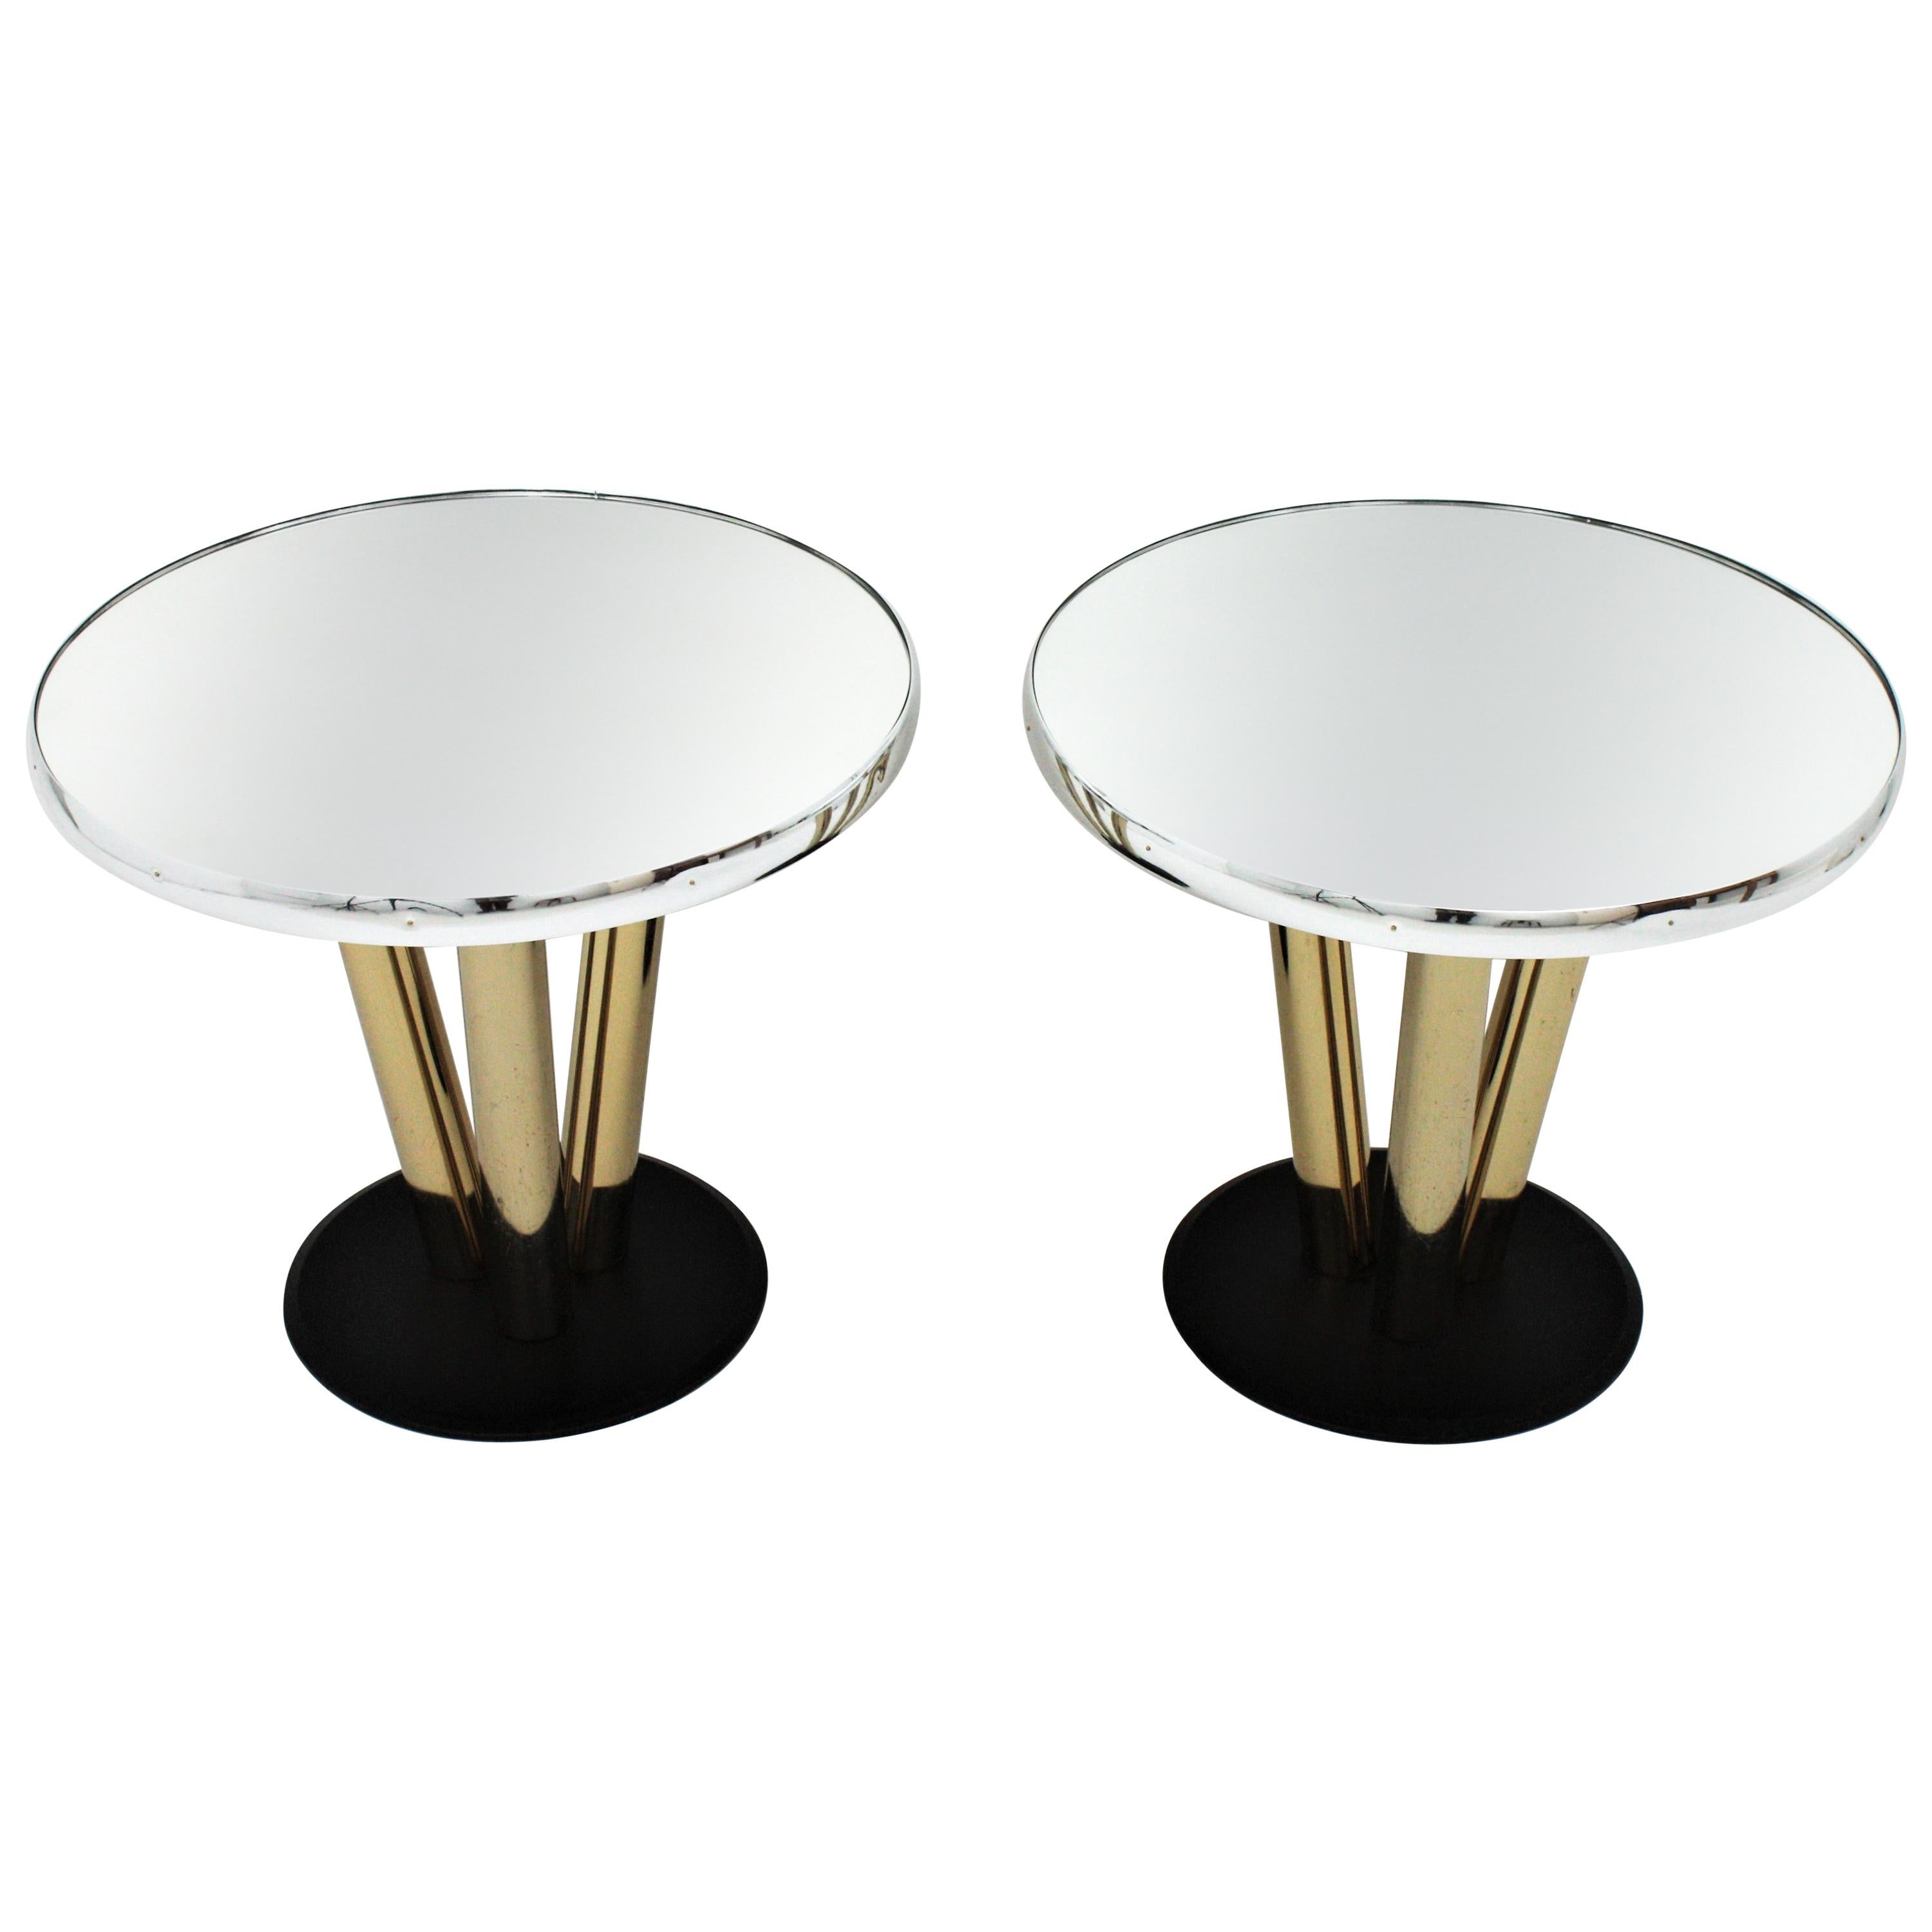 Pair of brass and black lacquered iron side tables with mirror tops from Niza Disco in Barcelona, Spain, 1950s. 
Beautiful Mid-Century Modernist brass, black lacquer and mirror round end tables / cocktails tables.
These tables feature a black